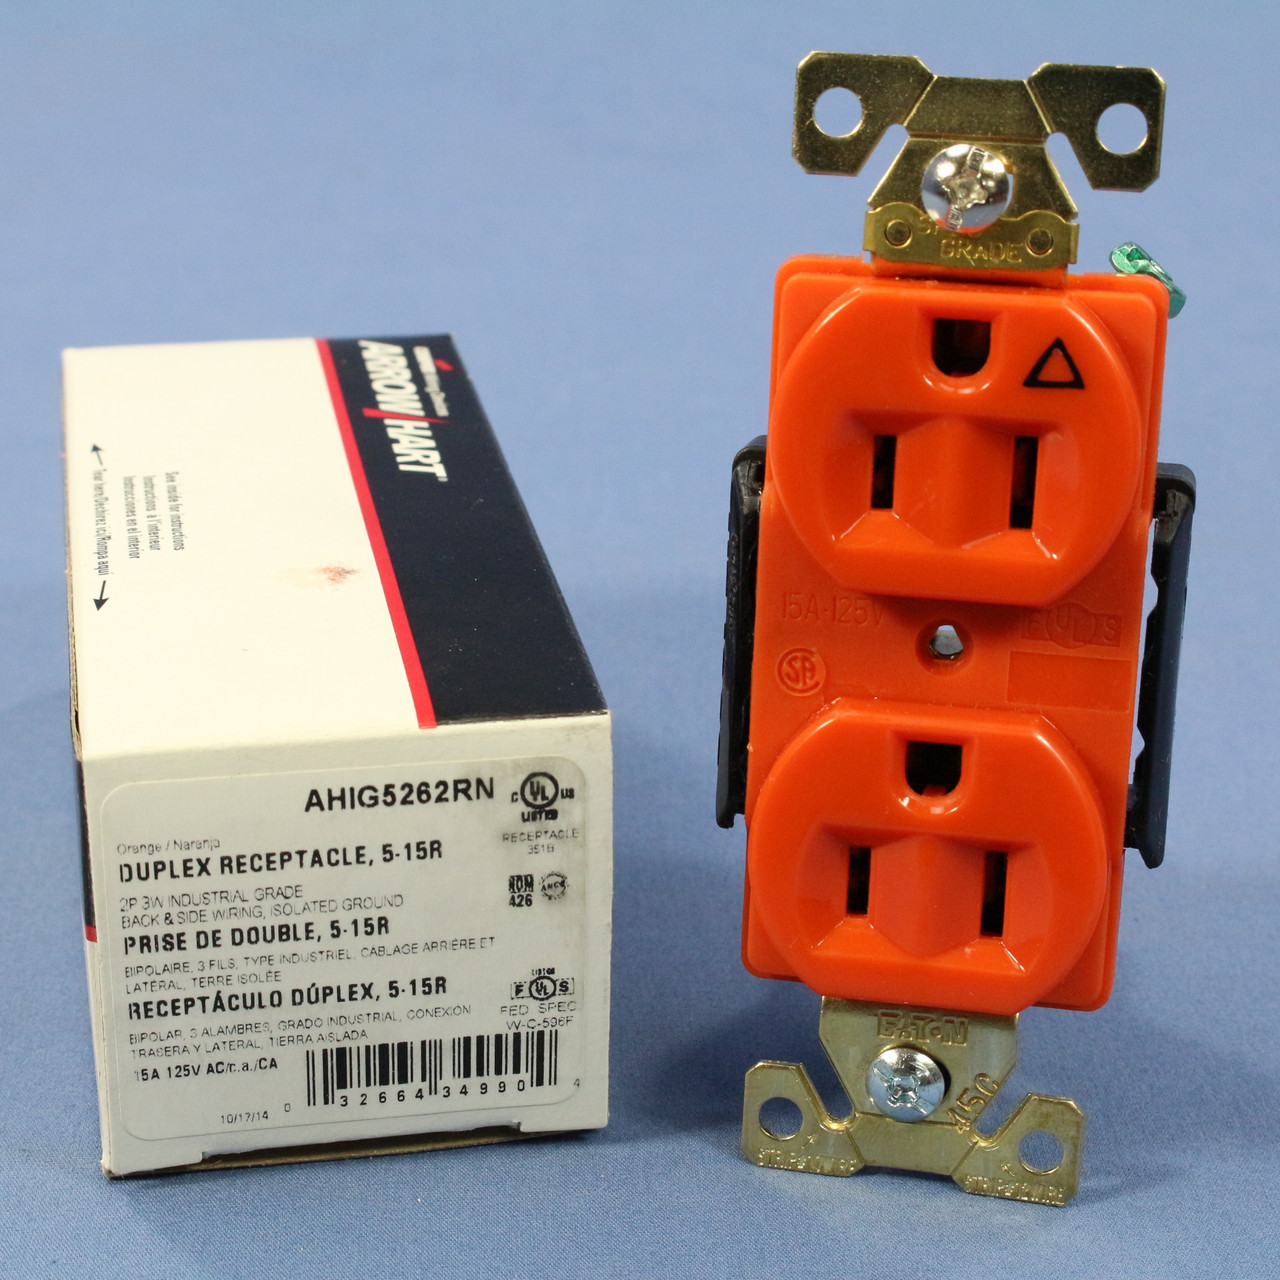 🏠 🔌 Cooper Arrow Hart Orange ISOLATED GROUND Receptacle Duplex Outlet 15A  AHIG5262RN - In Stock - Fruit Ridge Tools